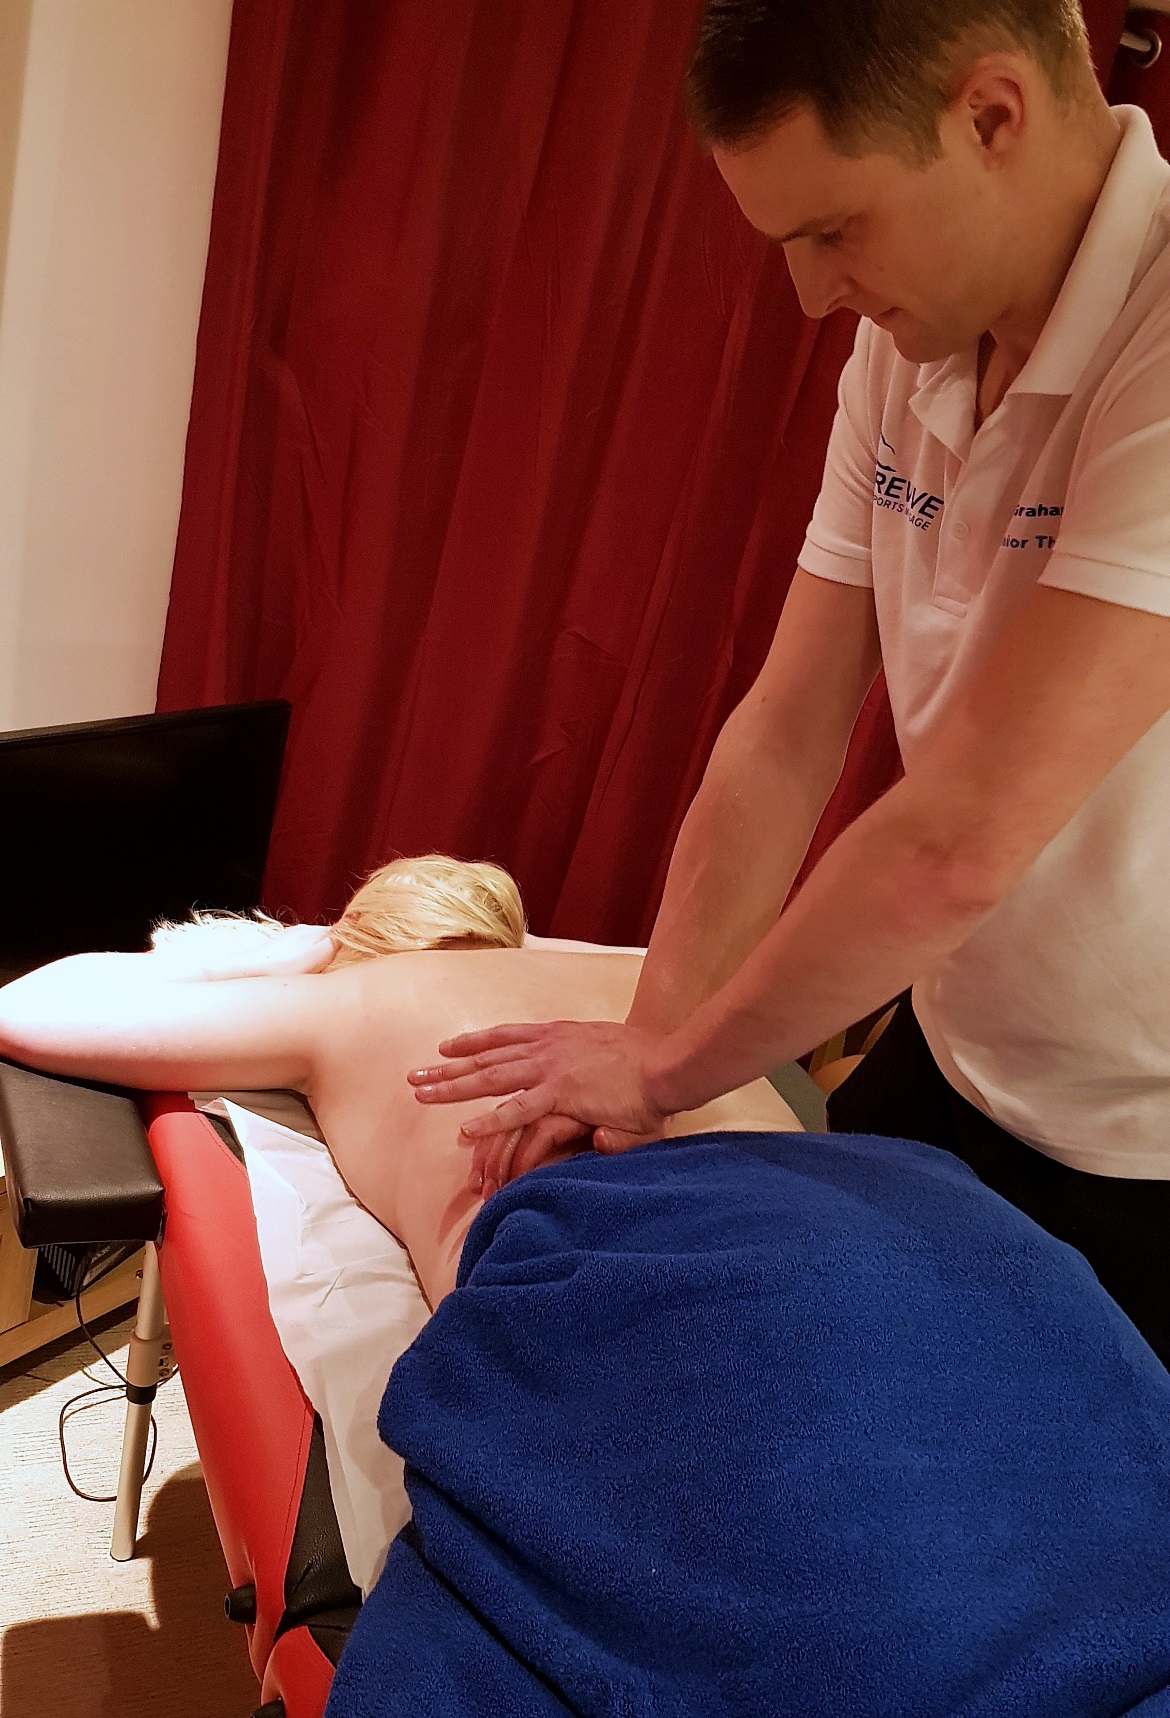 Lower back massage - Deep Tissue Massage with Revive Sports Massage in Leeds by BeckyBecky Blogs